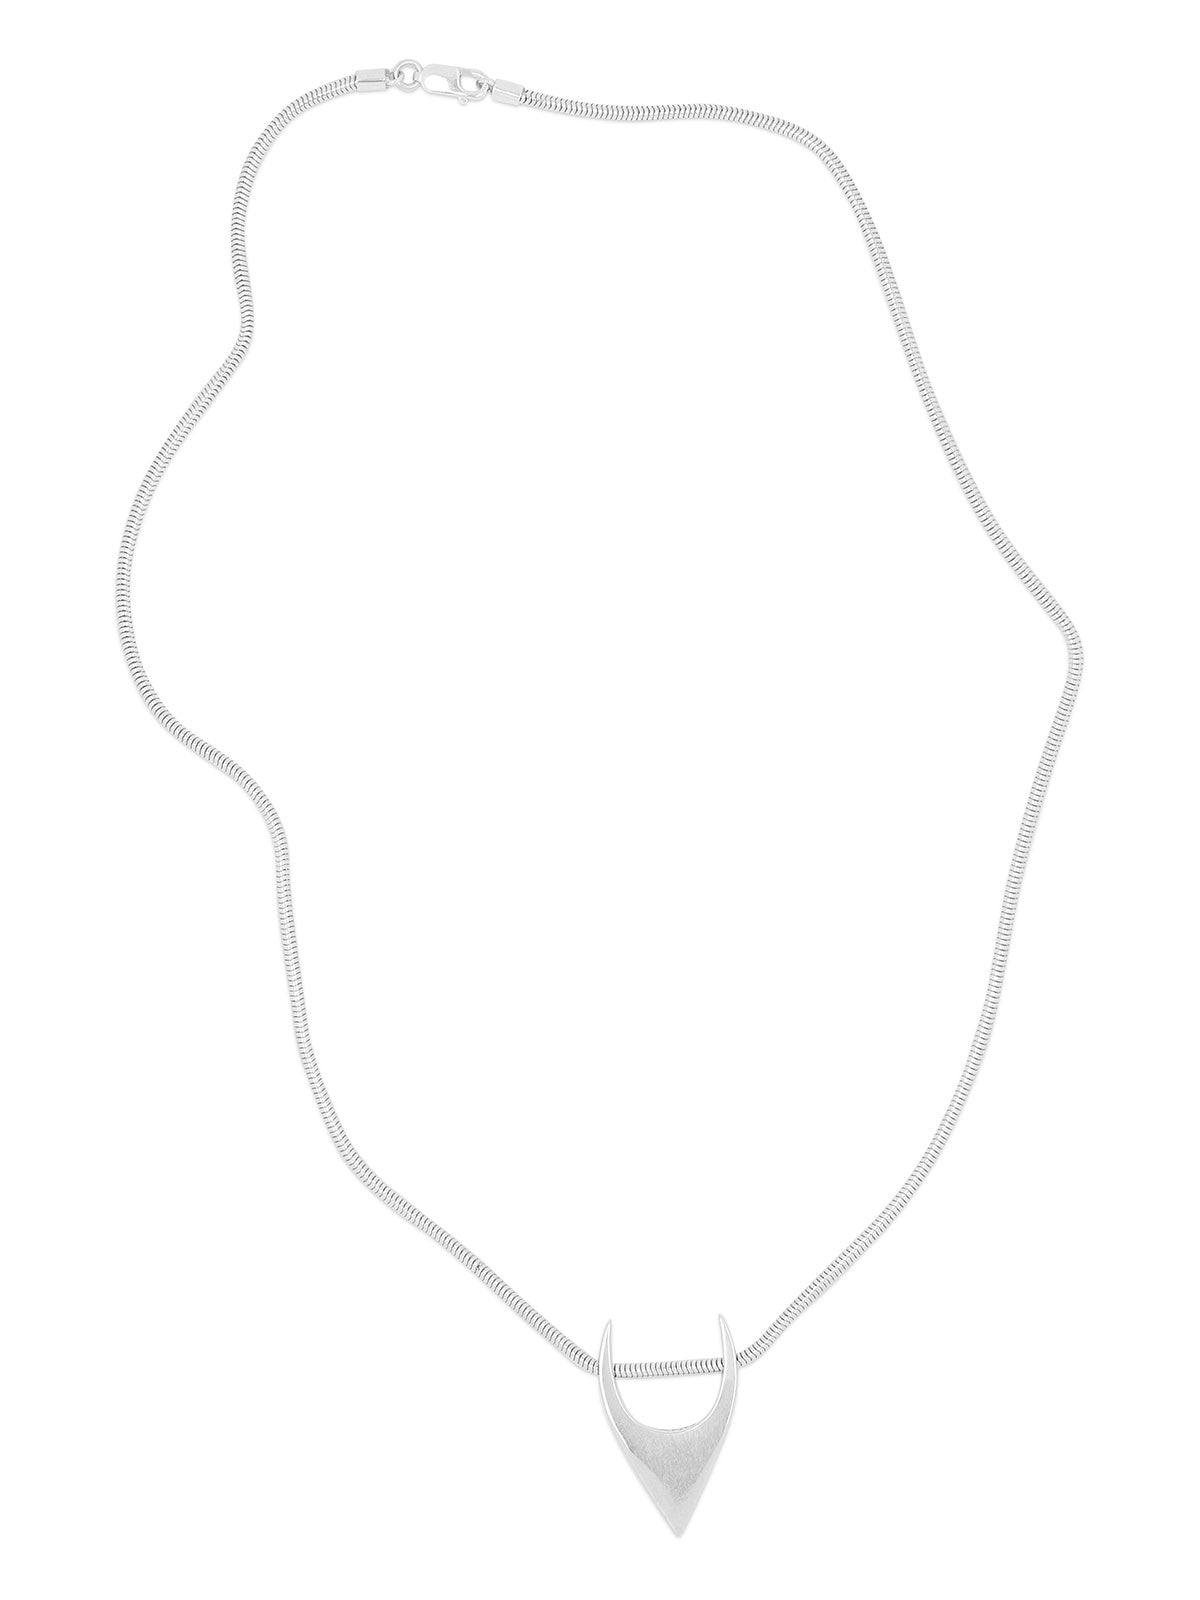 FANG Logo Snake Chain Necklace in Sterling Silver